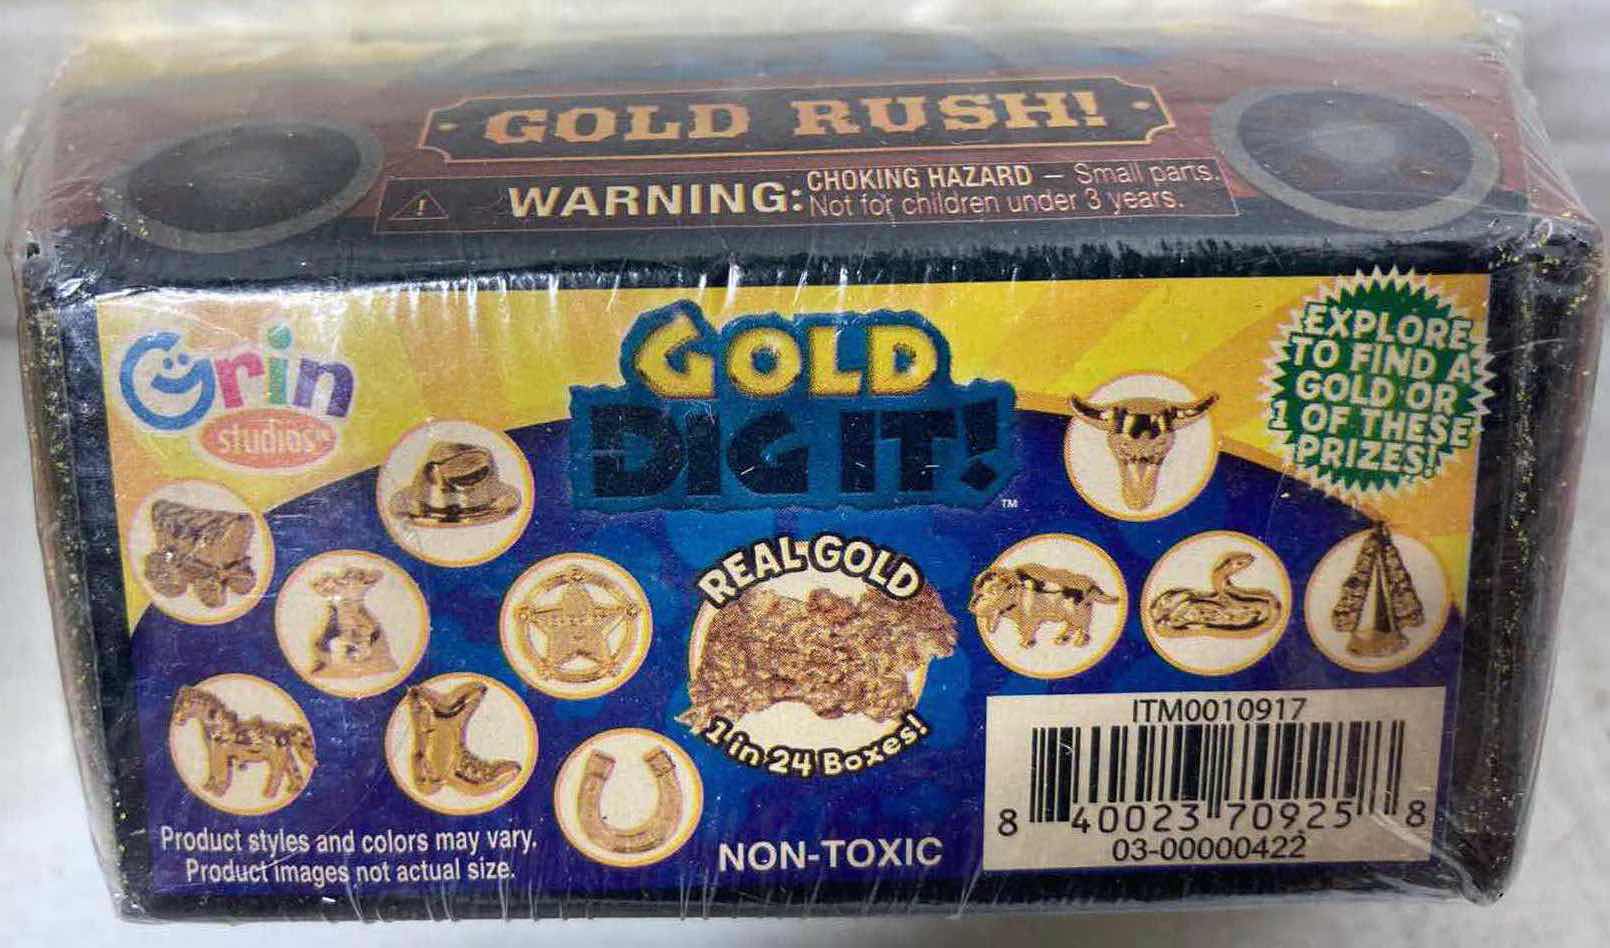 Photo 3 of NEW GRIN STUDIOS GOLD DIG IT GOLD RUSH COLORED SAND BULLION FIND REAL GOLD 1 IN 24 (5)